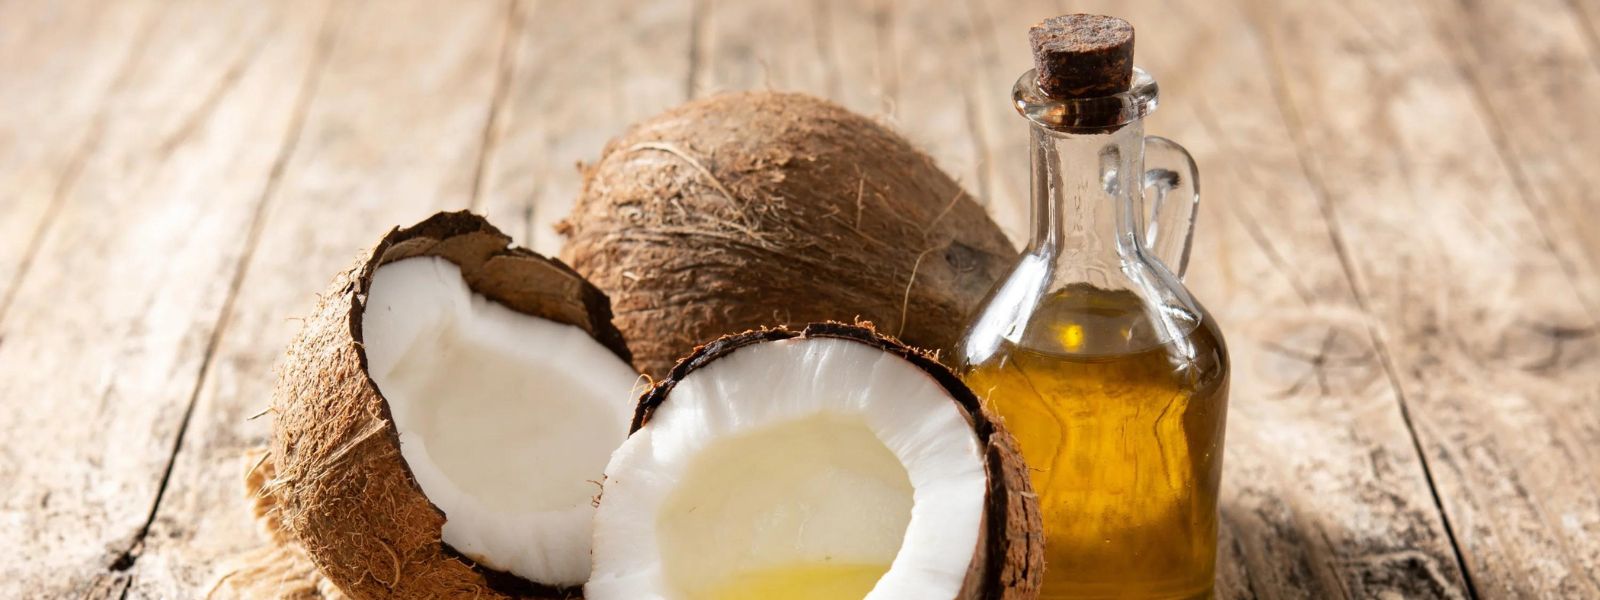 Imported Coconut Oil Shortage Expected in SL